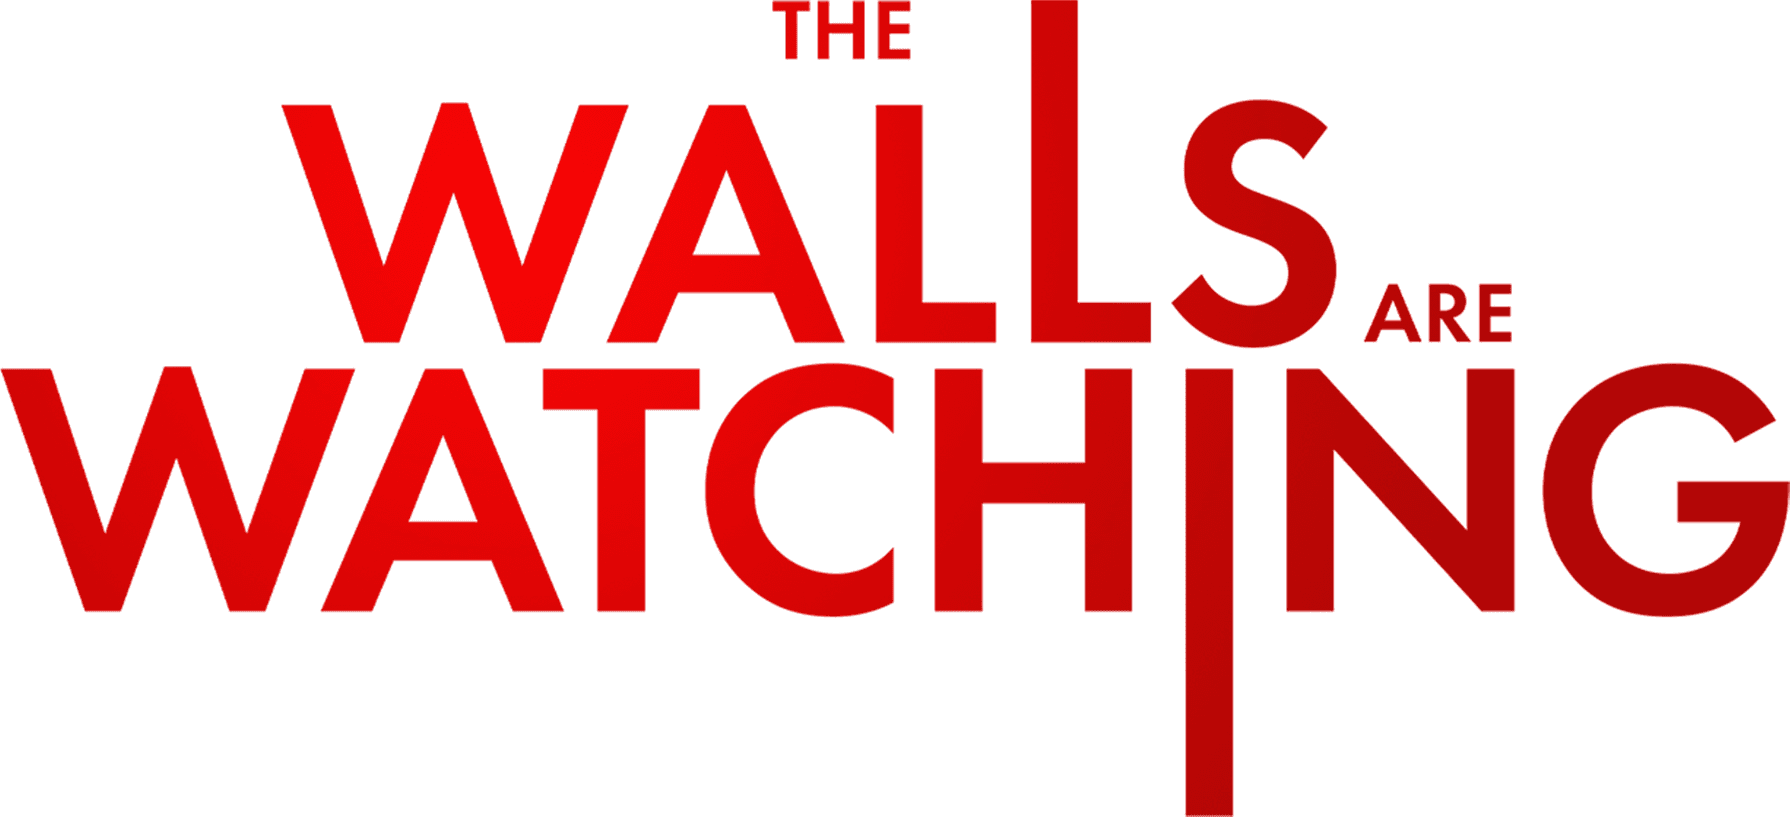 The Walls Are Watching logo